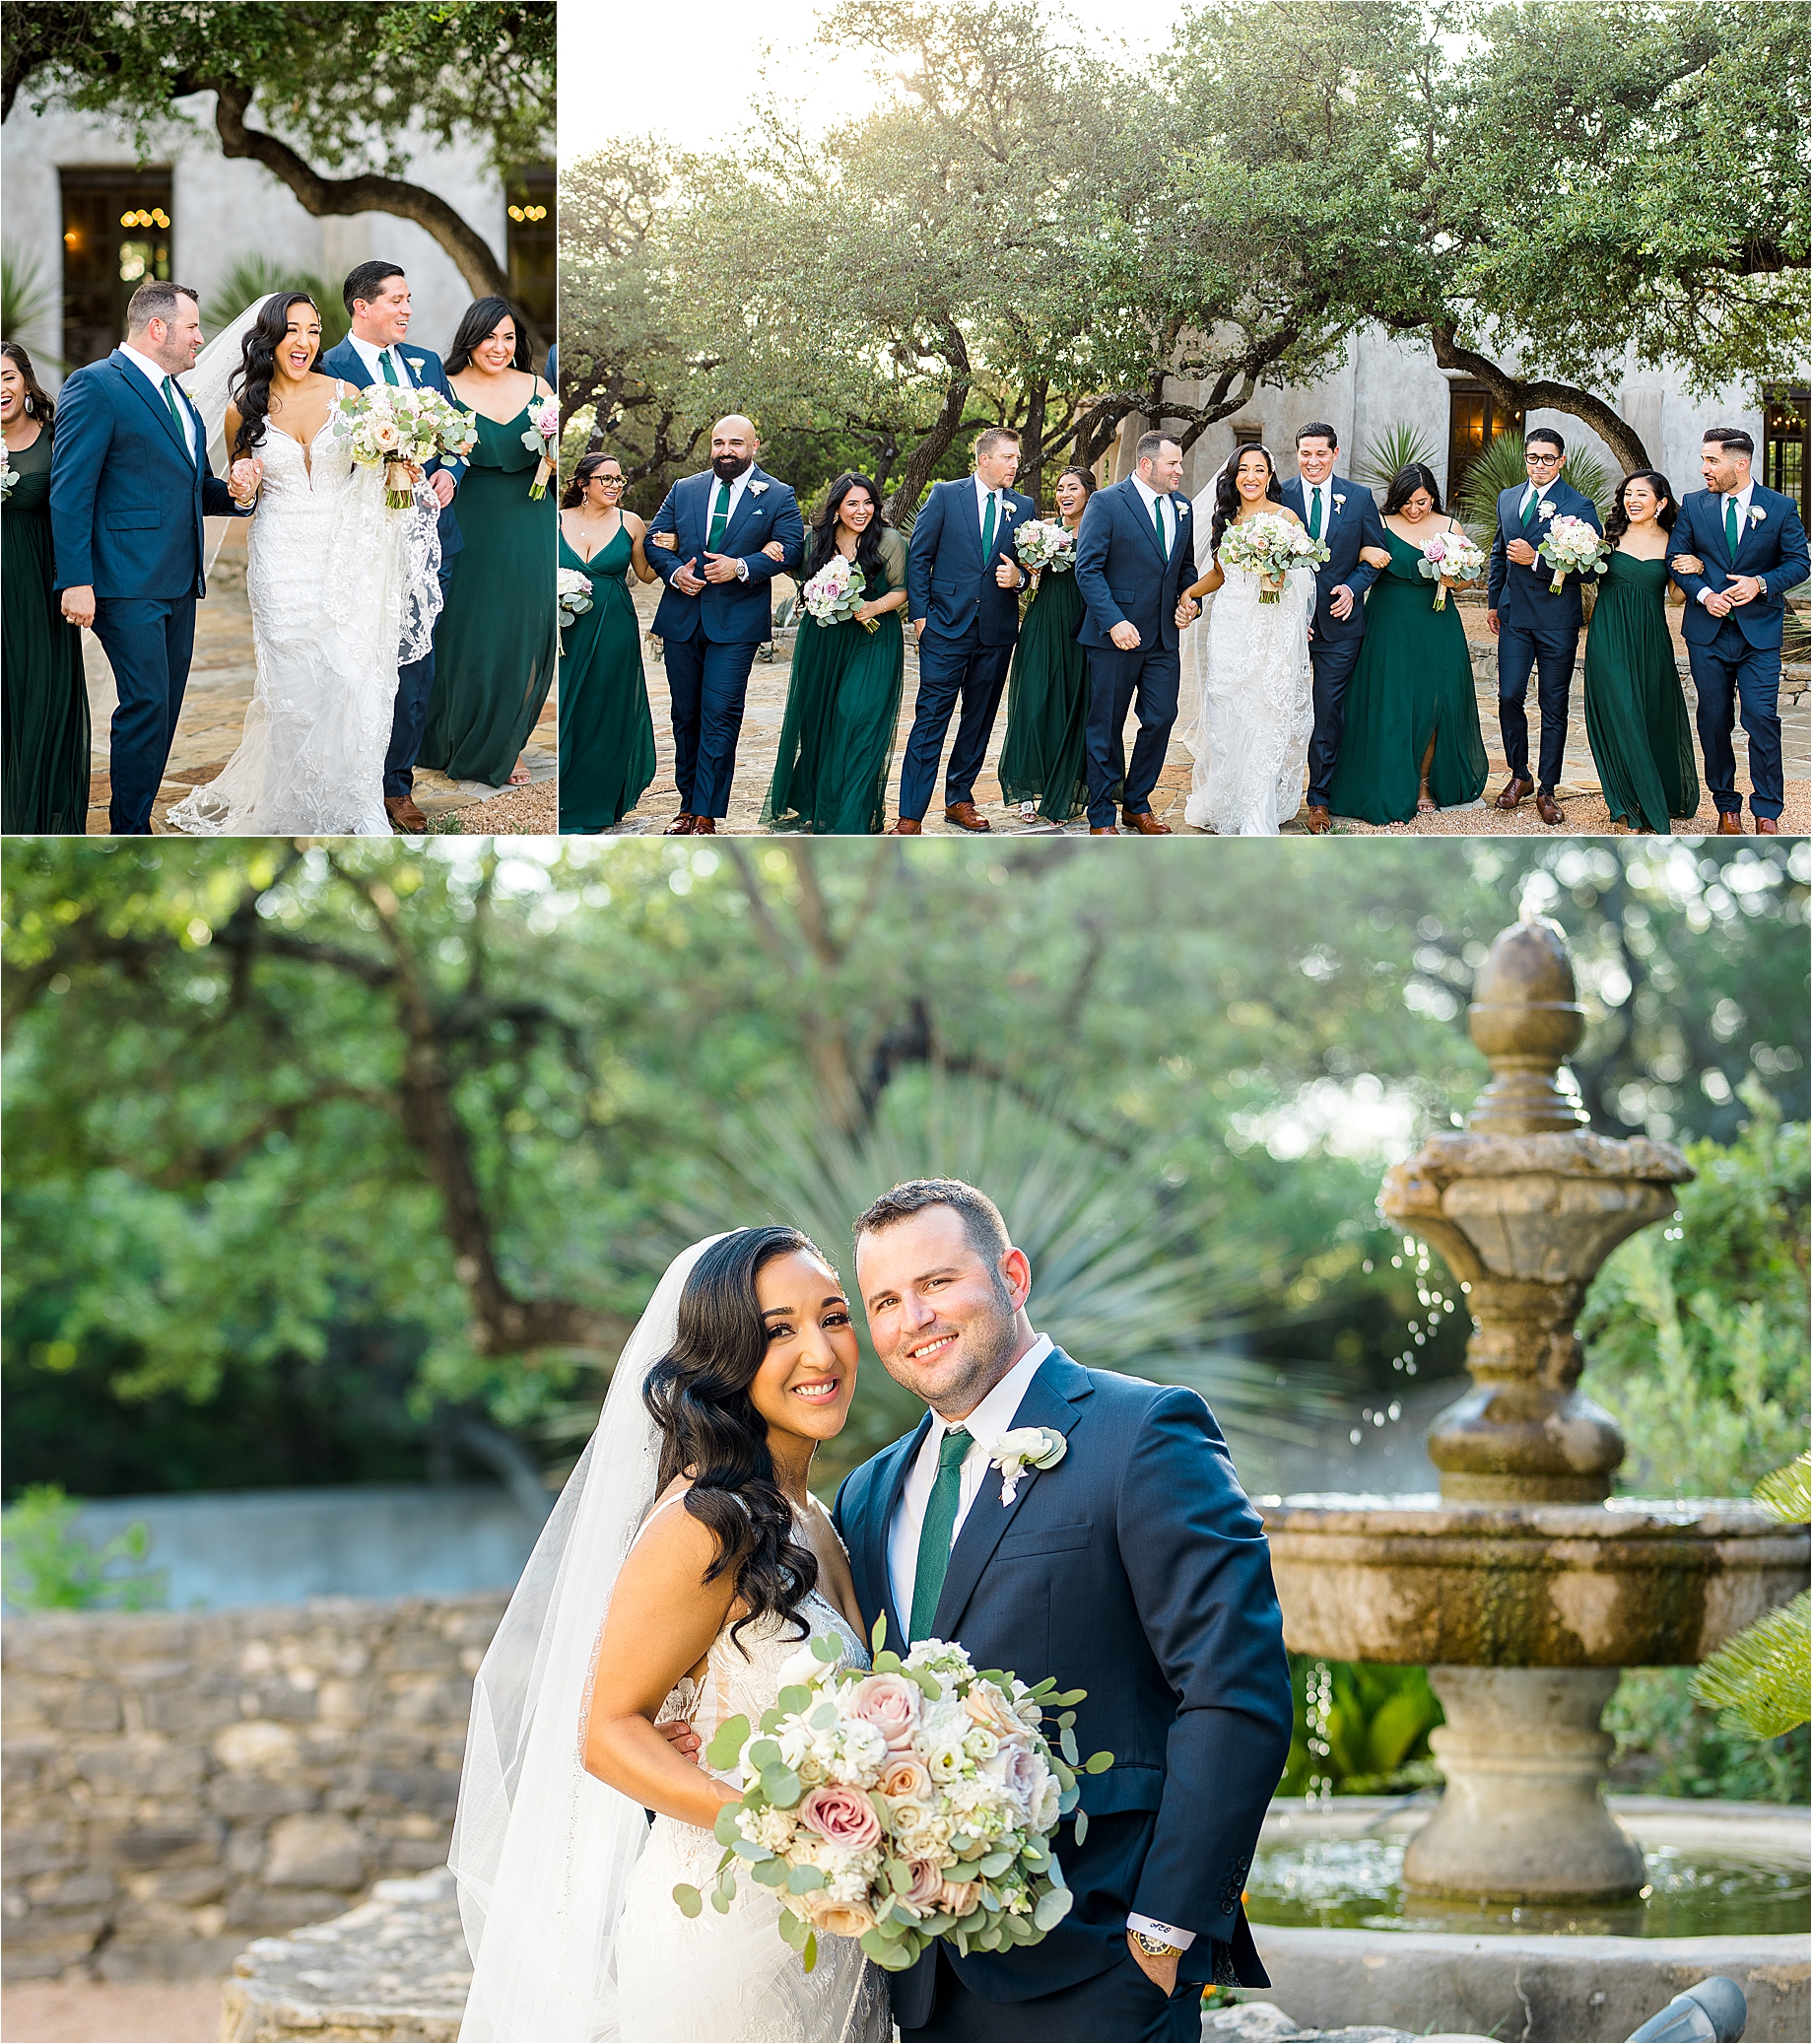 A bride and groom celebrate with their wedding party and pose for newlywed photos in front of a fountain at Lost Mission a wedding venue near San Antonio, Texas 